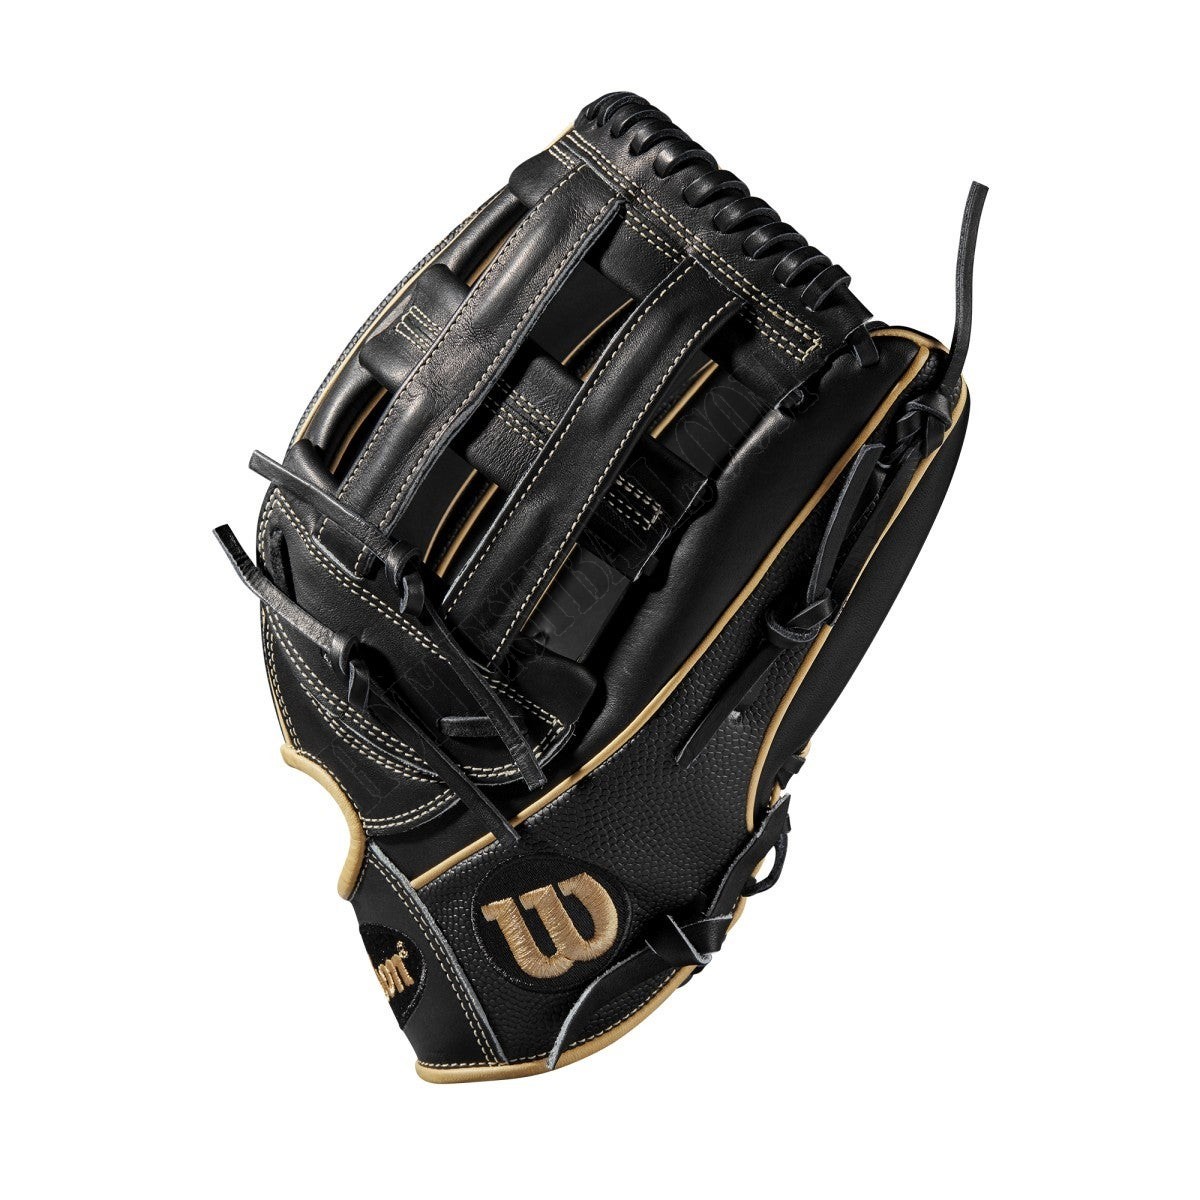 2019 A2000 1799 SuperSkin 12.75" Outfield Baseball Glove ● Wilson Promotions - -3